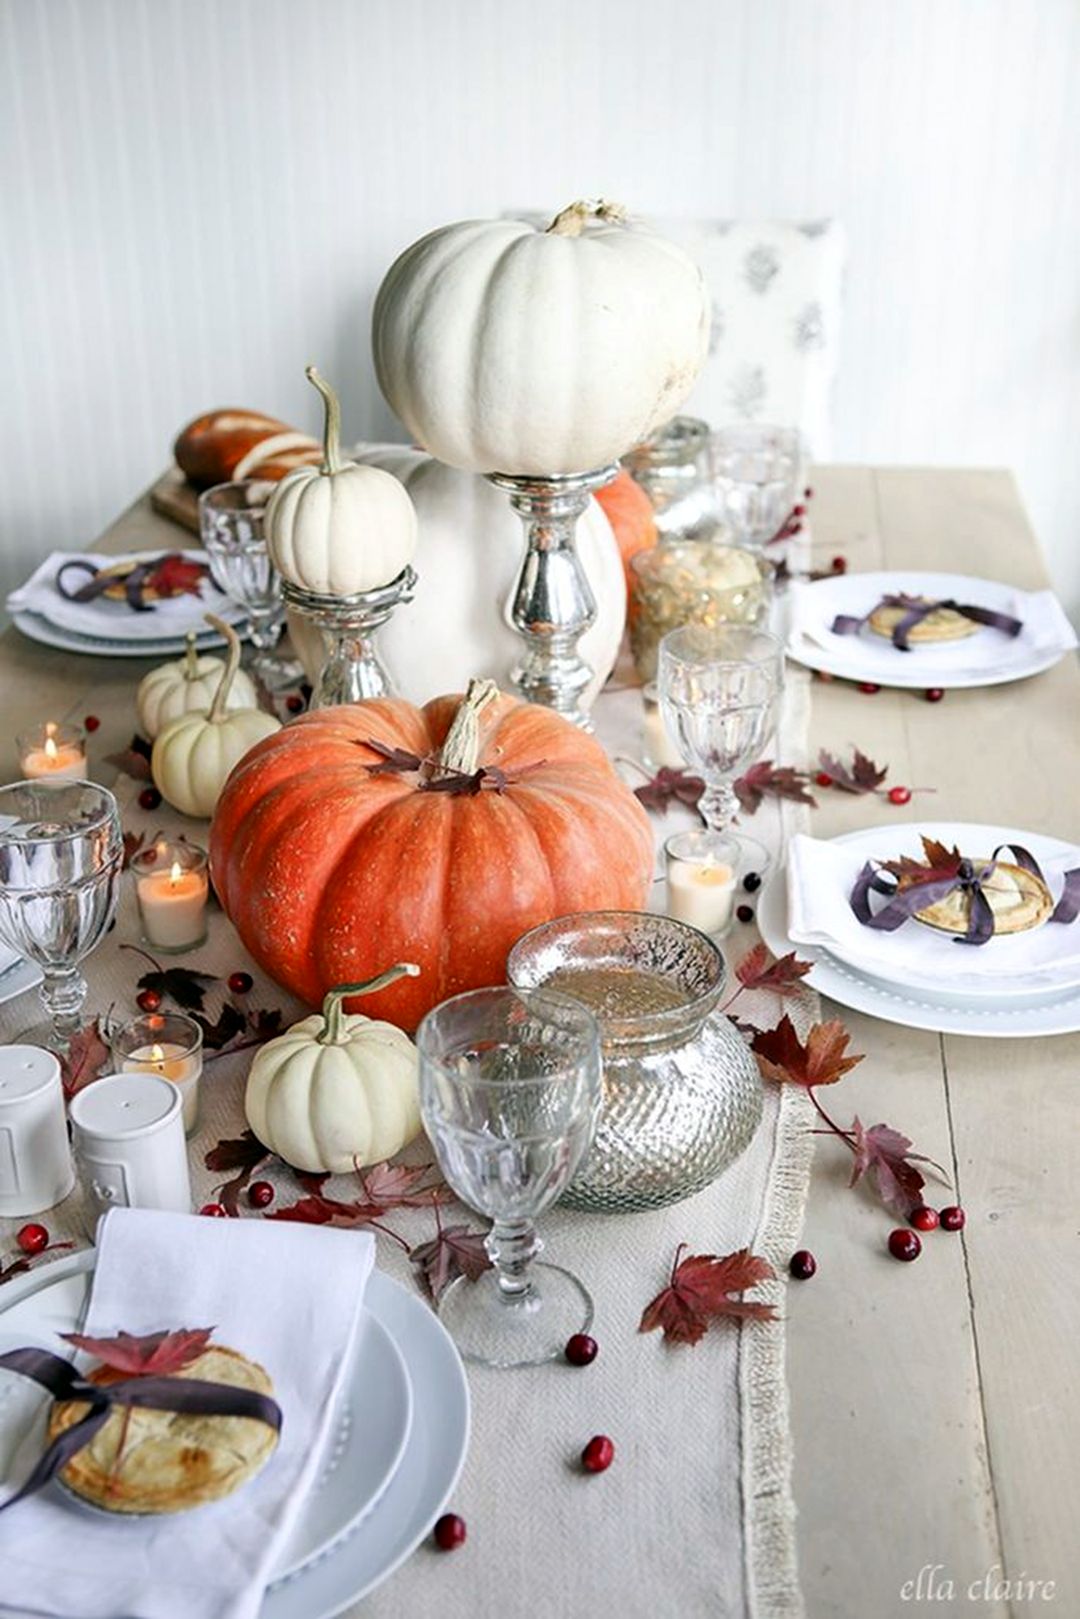 Charming Thanksgiving Tablescape With Pumpkins